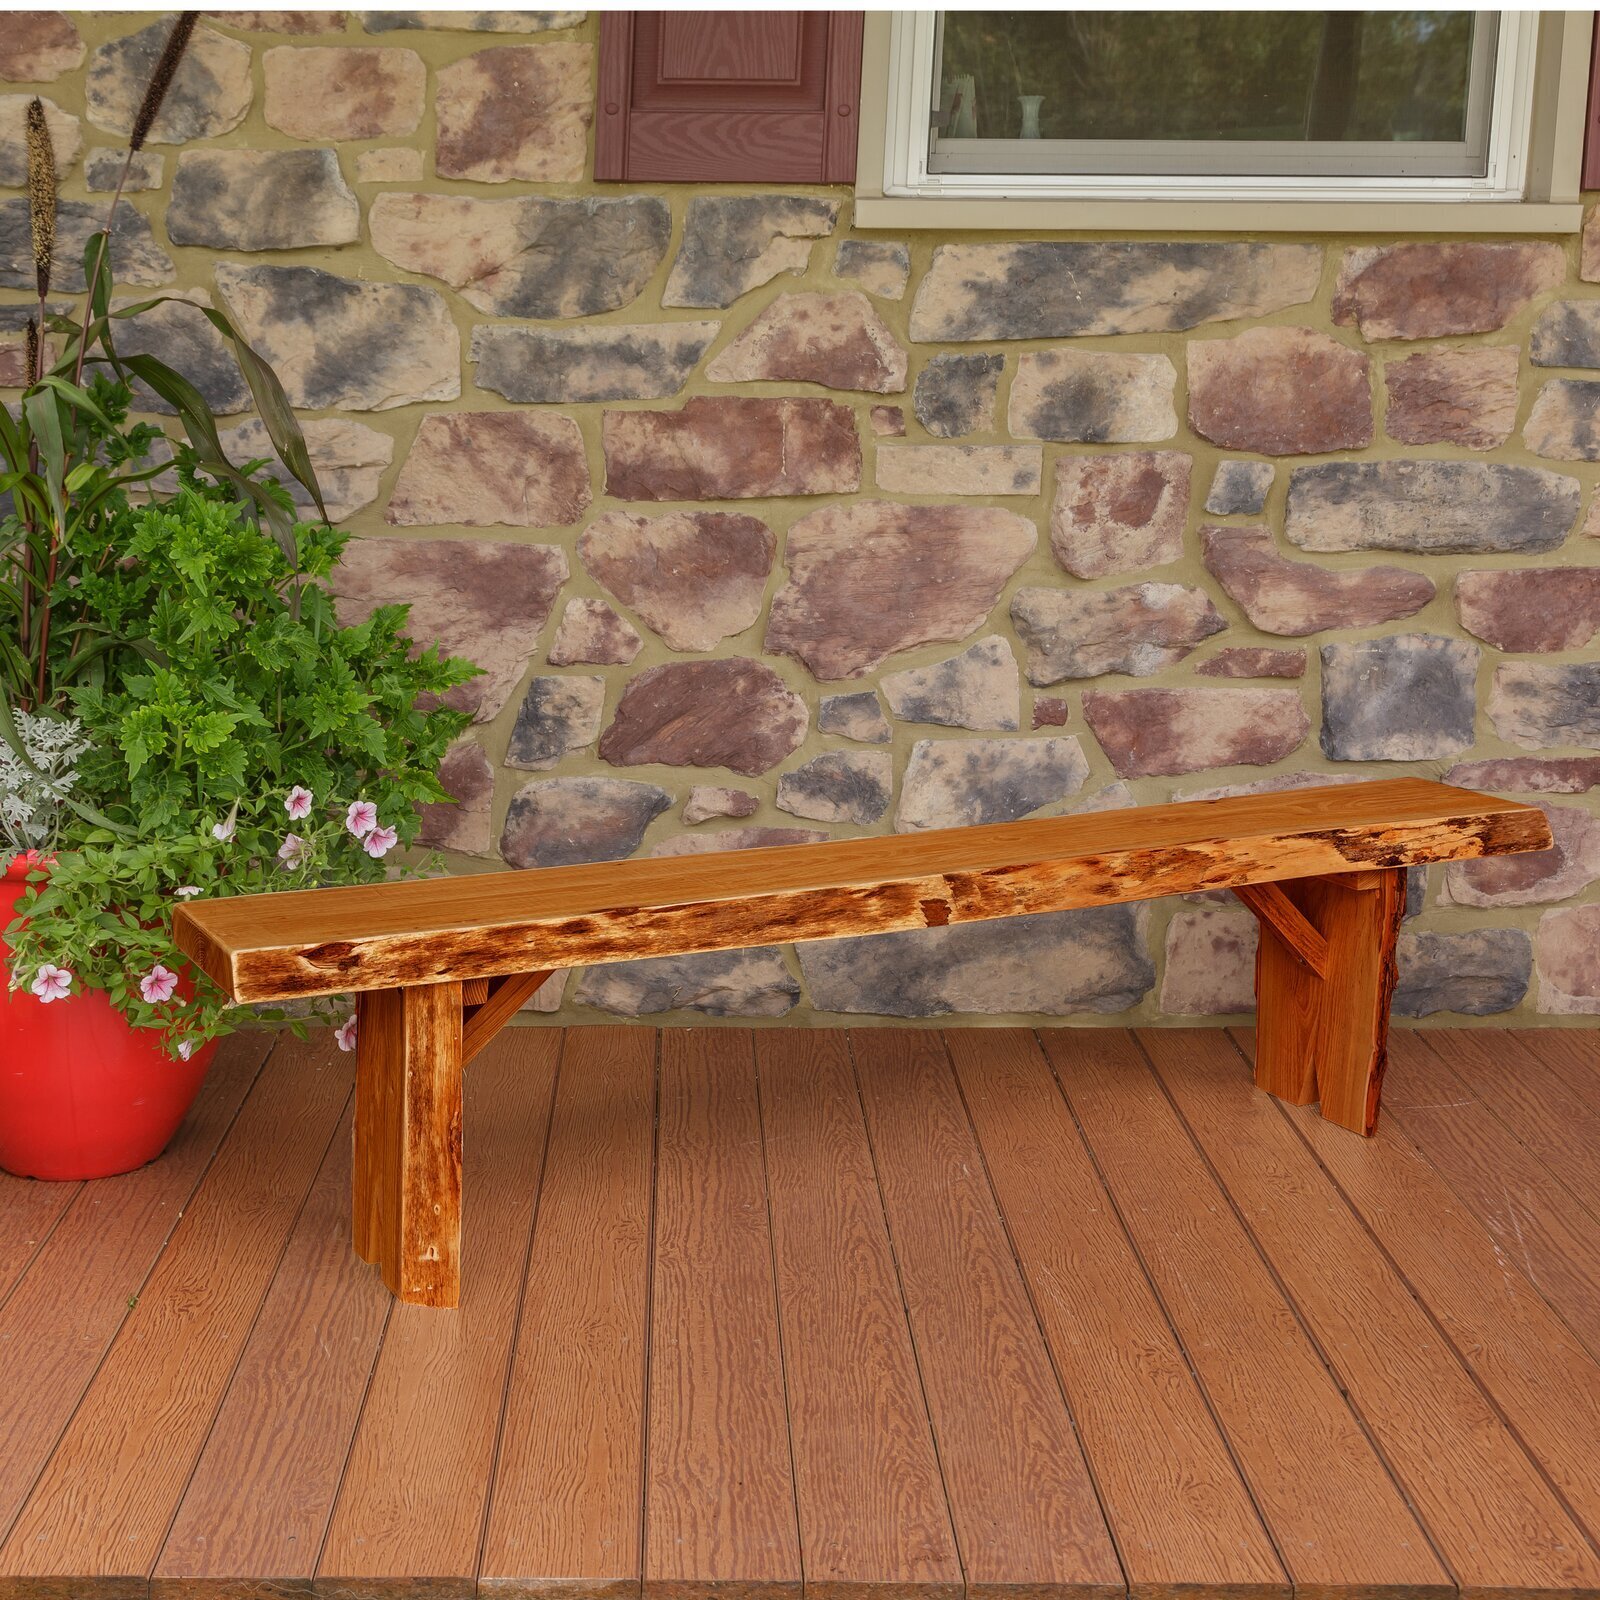 Rough Edge Log Bench To Finish Off Your Cabin or Cottage